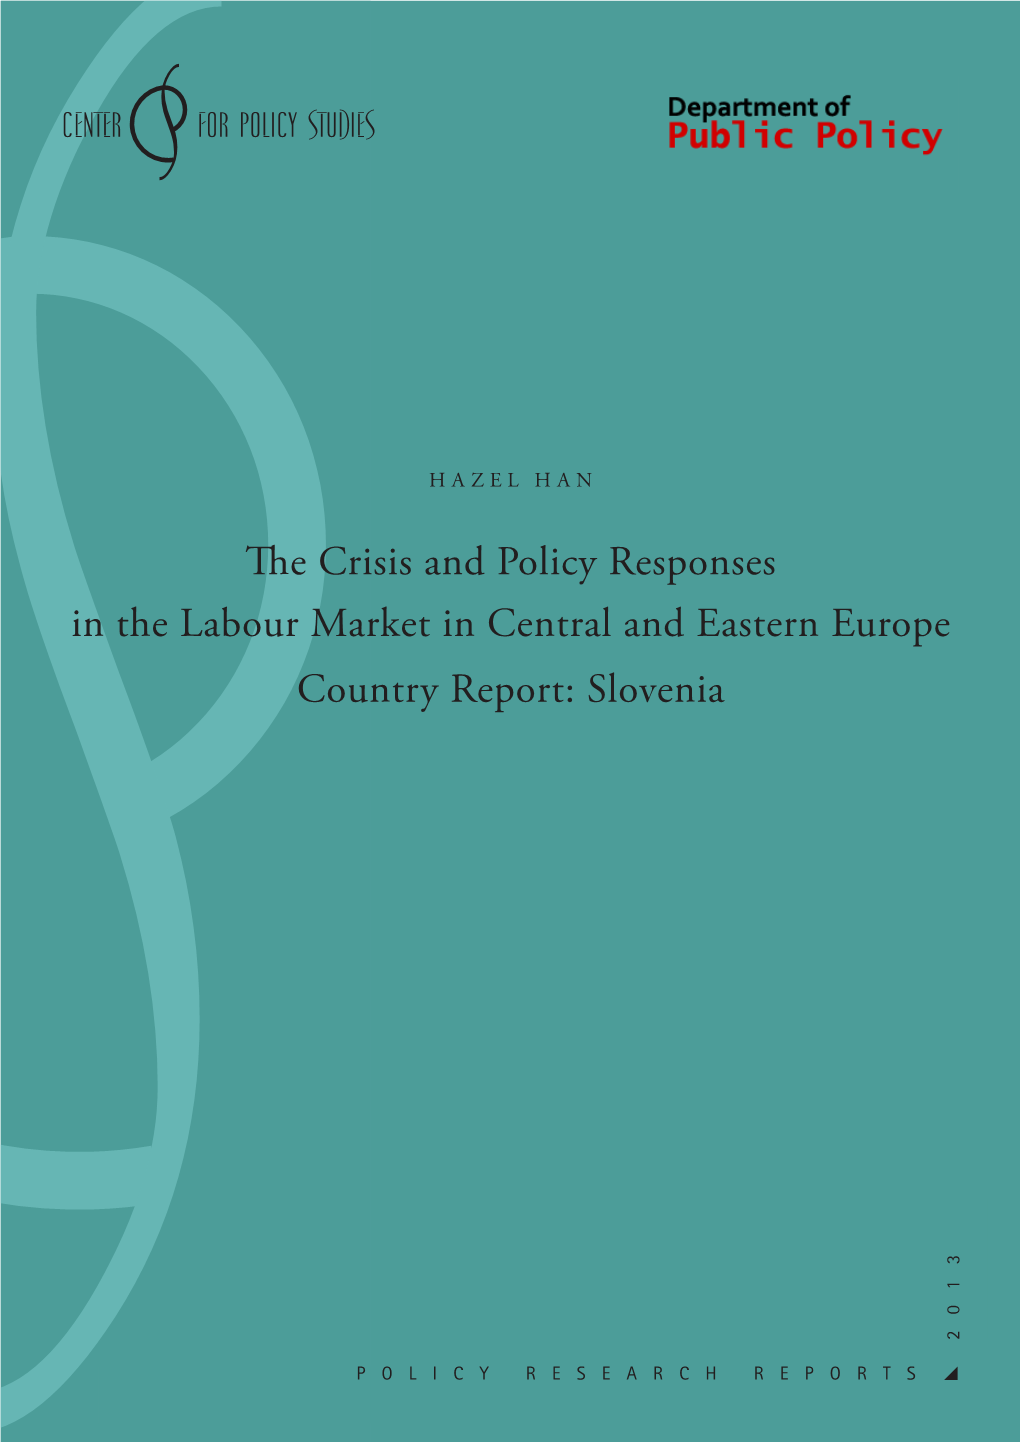 The Crisis and Policy Responses in the Labour Market in Central and Eastern Europe Country Report: Slovenia 2013